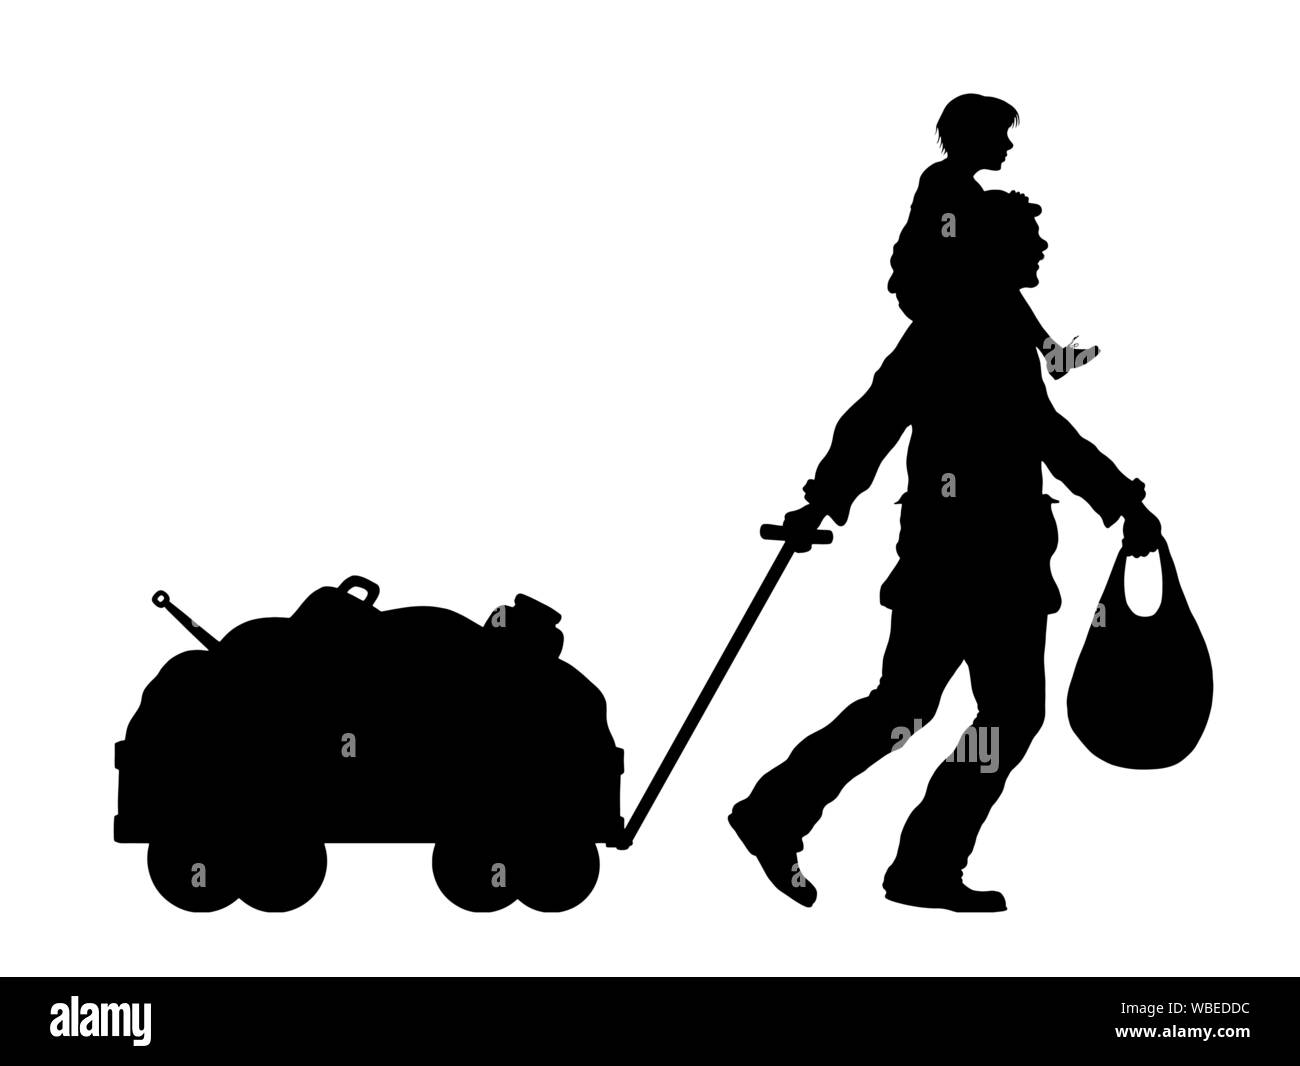 Refugee man and his son silhouette with cart. The silhouette objects and background are in different layers. Stock Vector